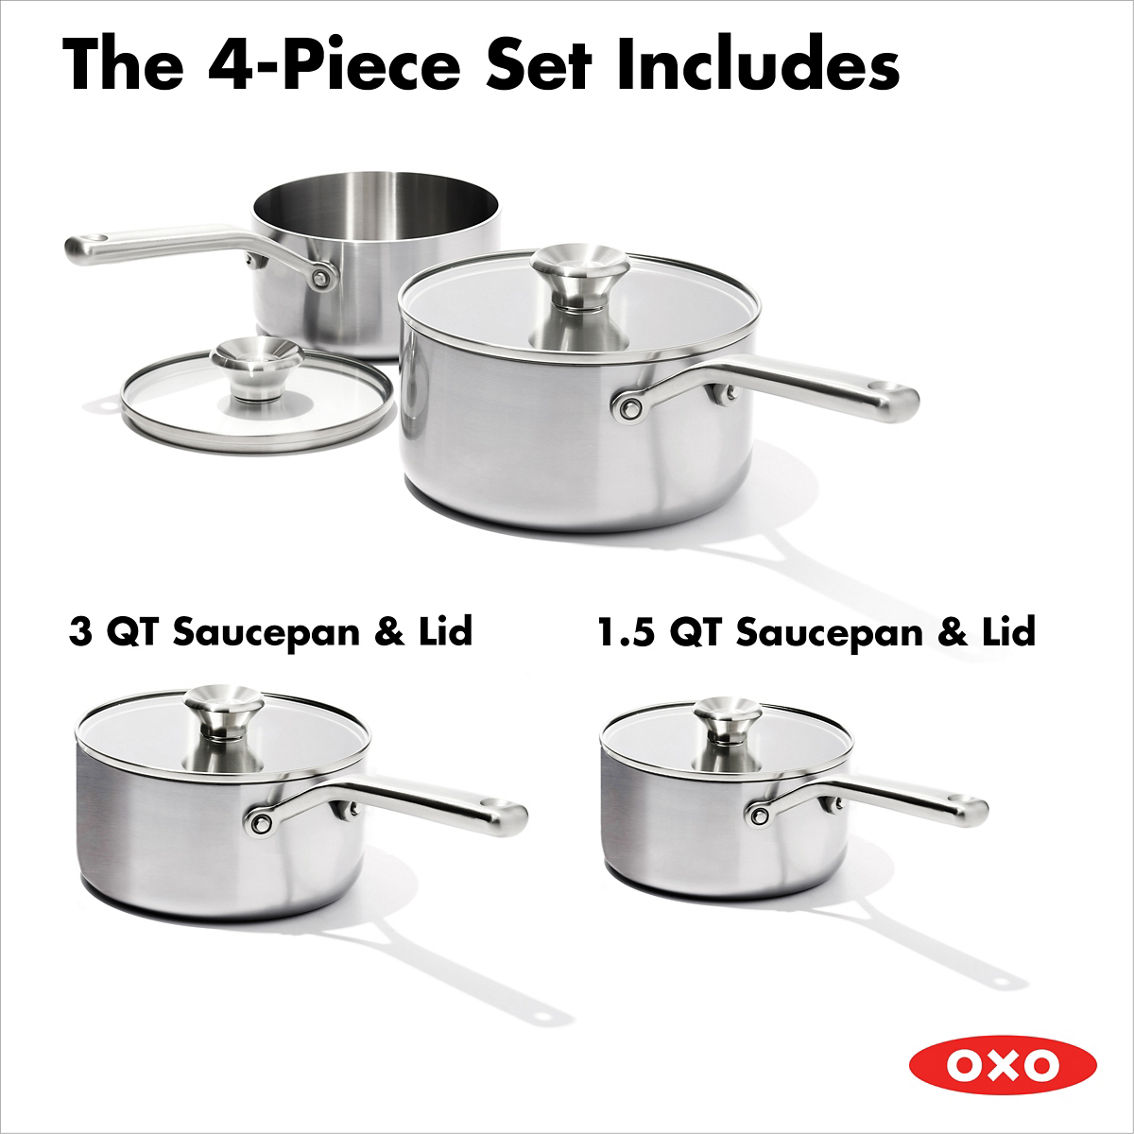 OXO Mira 3-Ply Stainless Steel Saucepan 2 pc. Set - Image 8 of 8